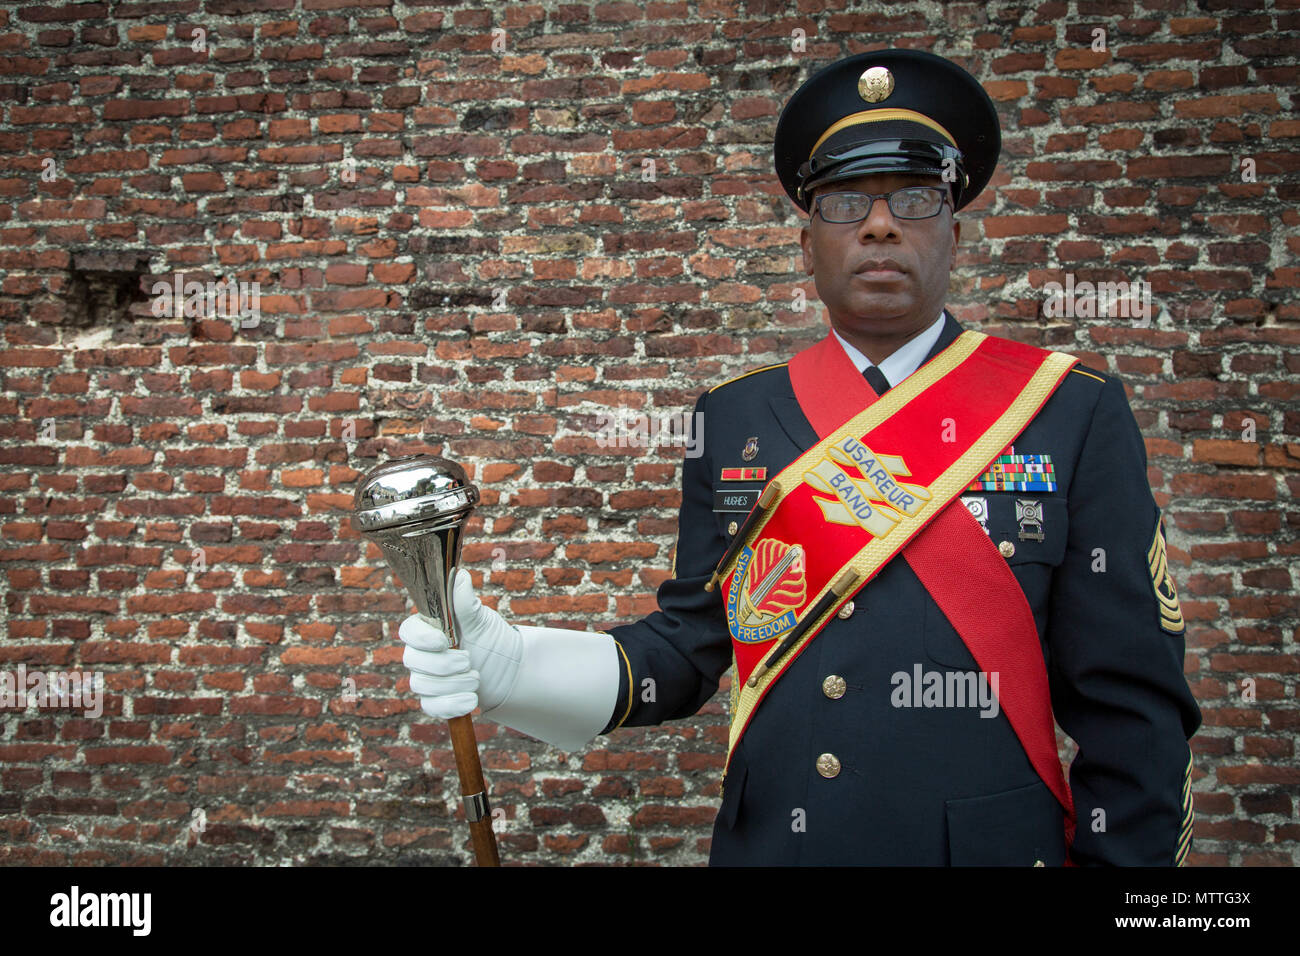 Drum major SGM Jesse L. Hughes, at the Citadelle 350 anniversary, May 25, 2018, Lille, France.  US Army photo by Sgt Joseph Agacinski/released. Stock Photo